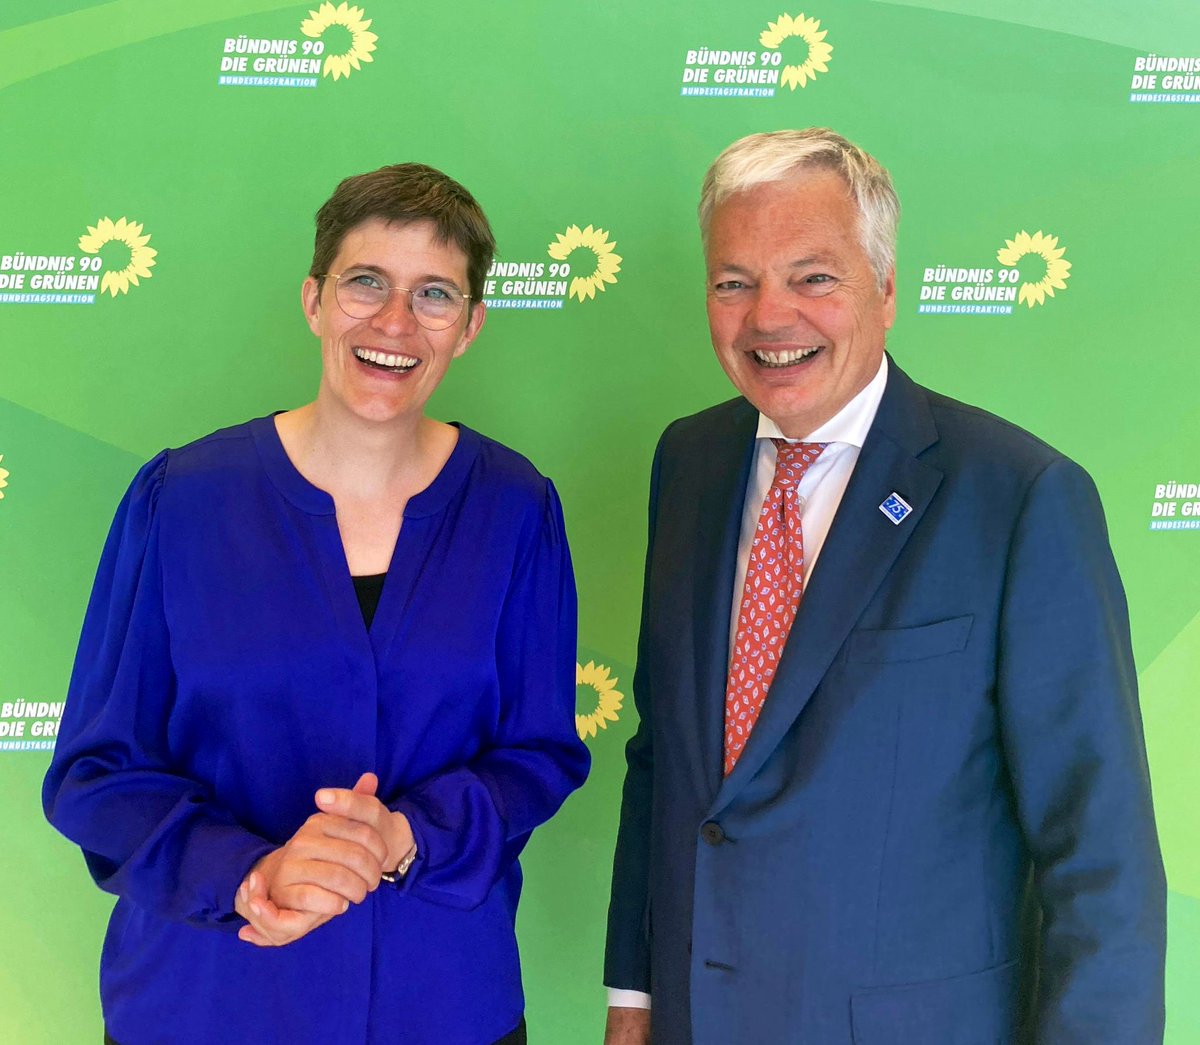 It was a pleasure to meet again with @AnnaLuehrmann, 🇩🇪 Deputy Minister for #European Affairs, today in #Berlin to discuss about my candidacy for the post of Secretary General of @coe. Thank you for having me! J'ai eu le plaisir de rencontrer à nouveau ce mardi à #Berlin…